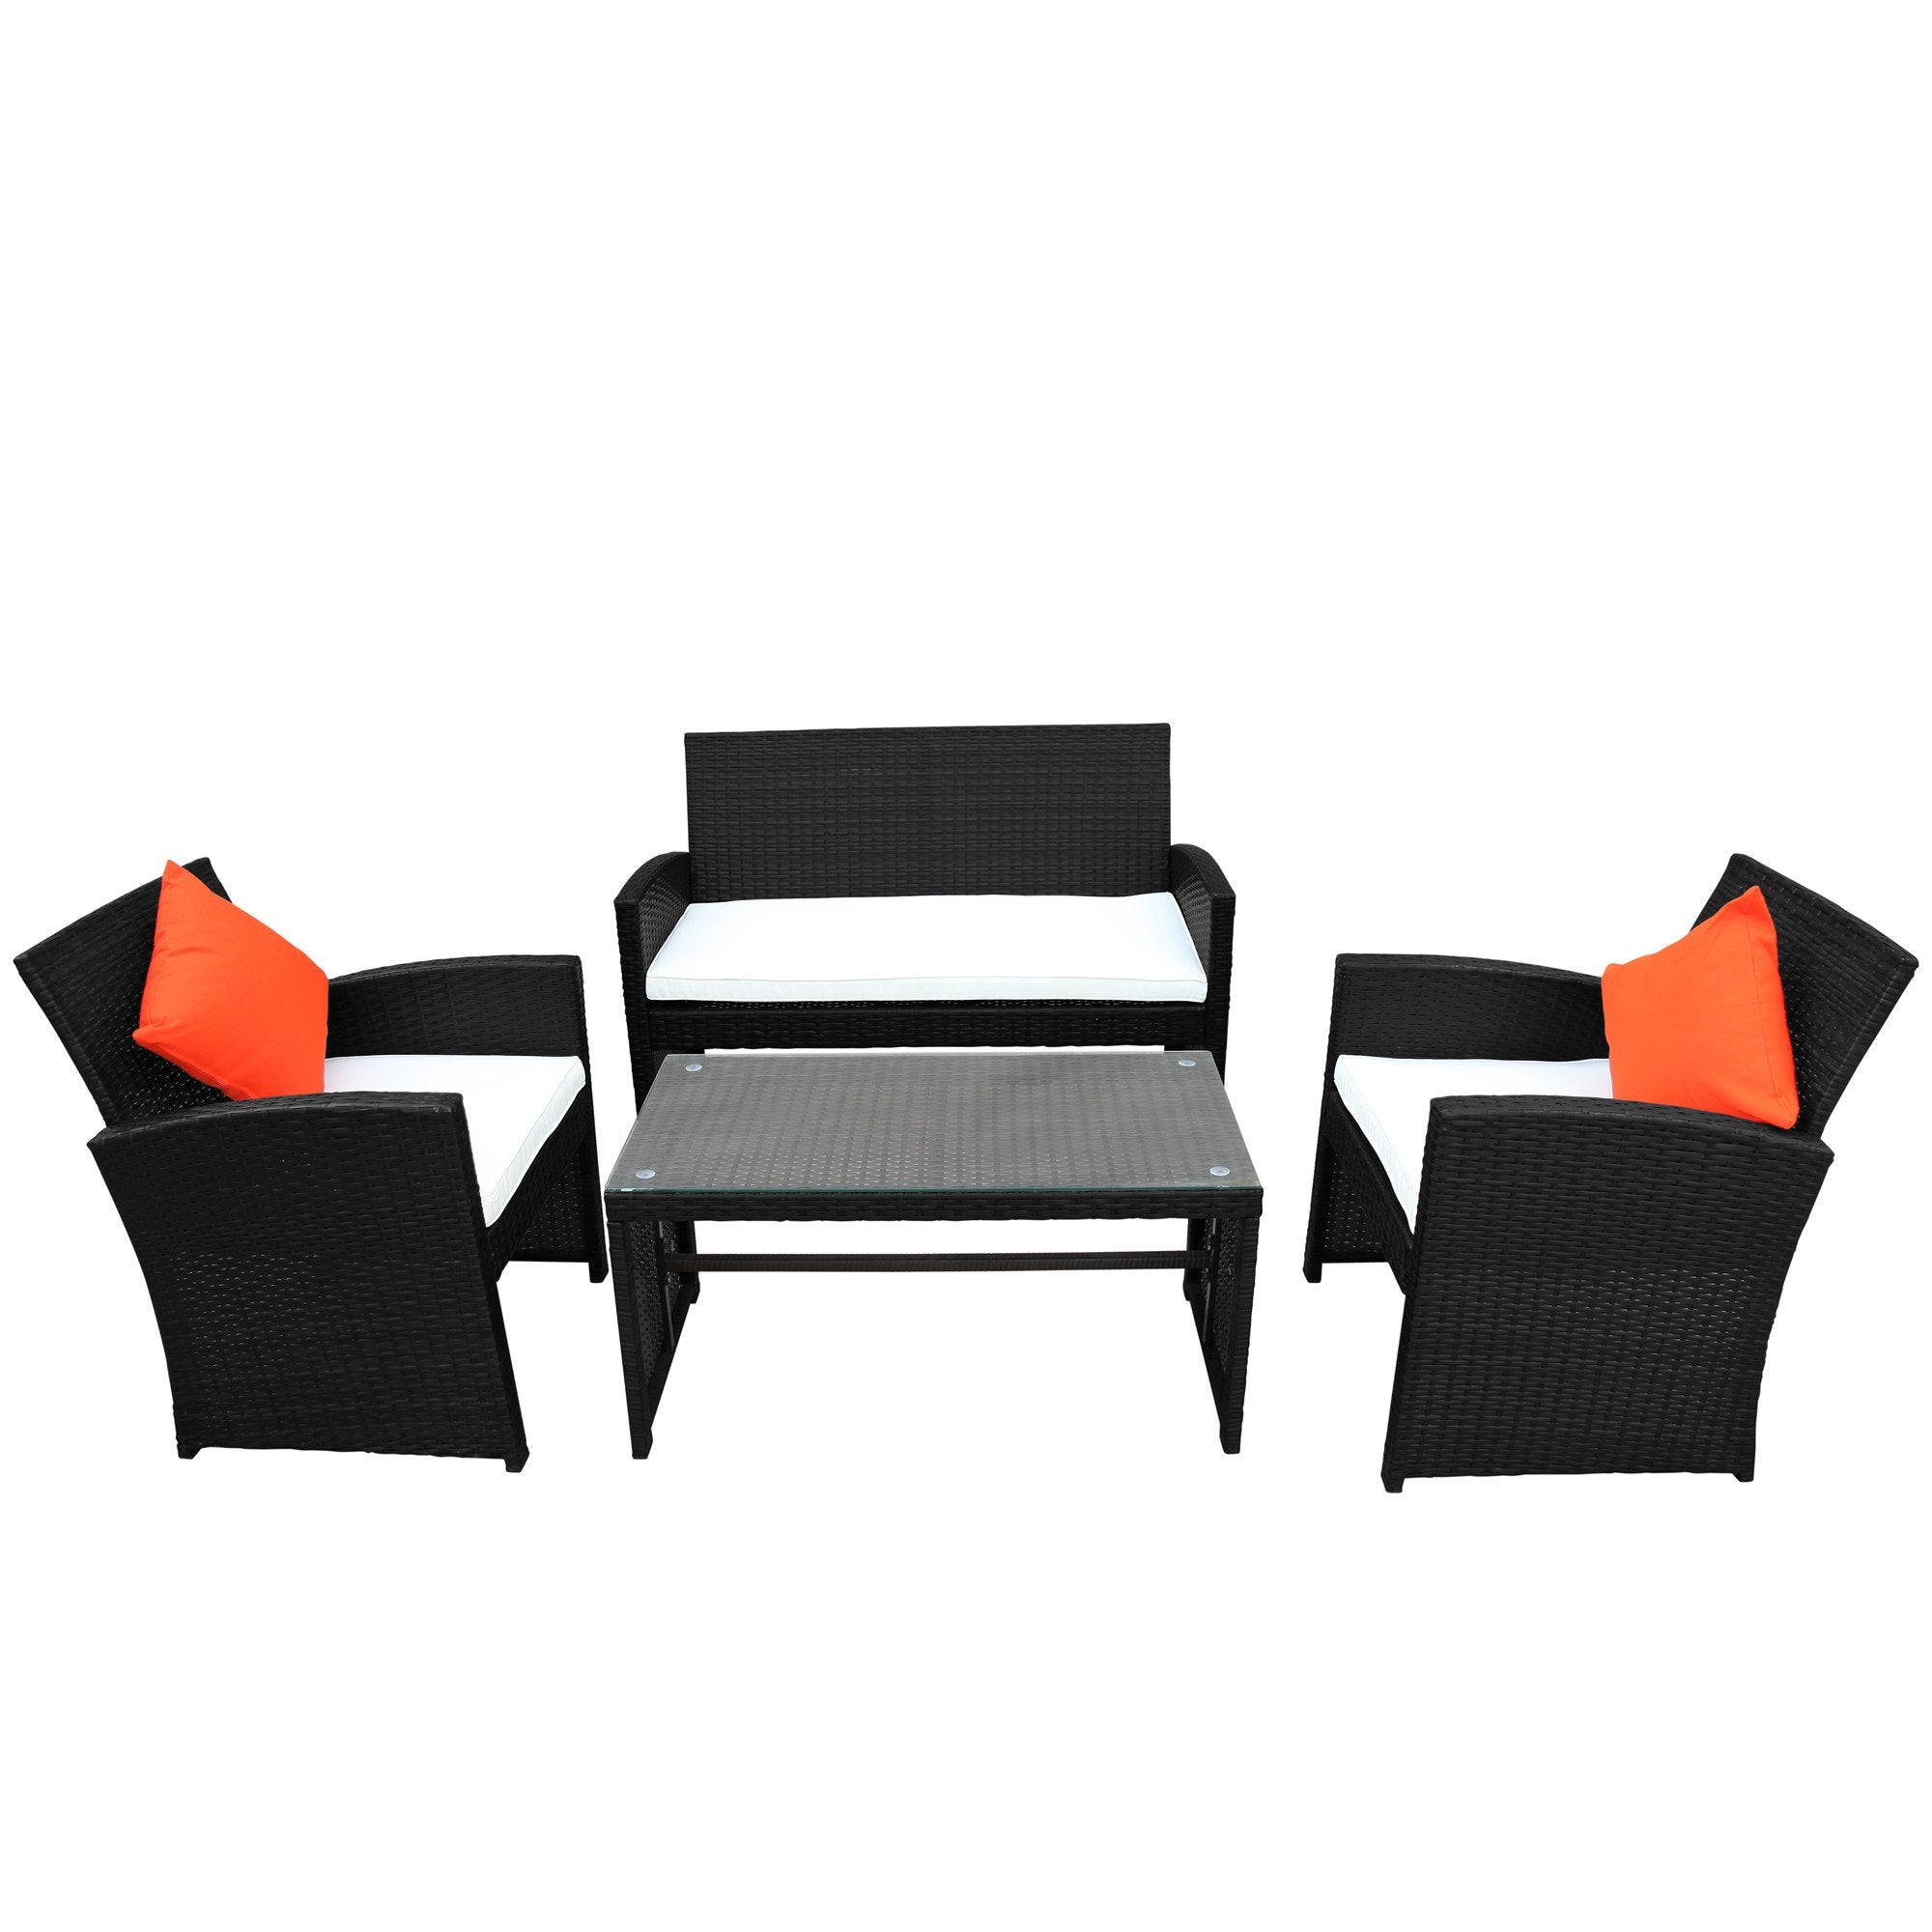 4-Piece Outdoor Patio Set  Rattan Loveseat and Chairs with Tempered Glass Tabletop, Cushioned Seats